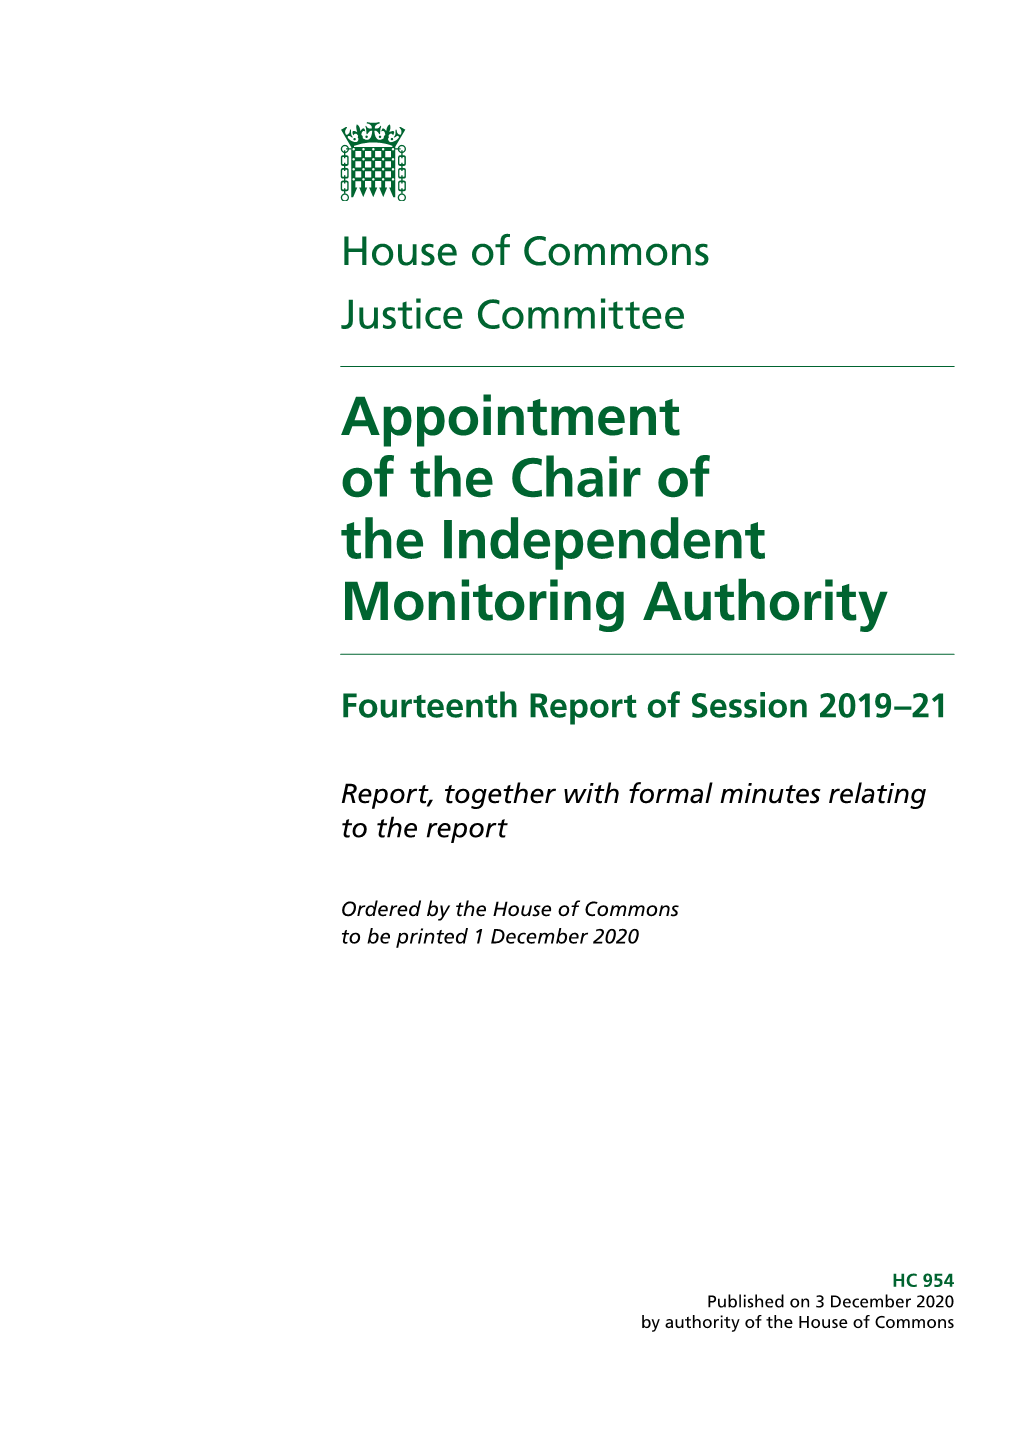 Pre-Appointment Hearing: Chair of the Independent Monitoring Authority